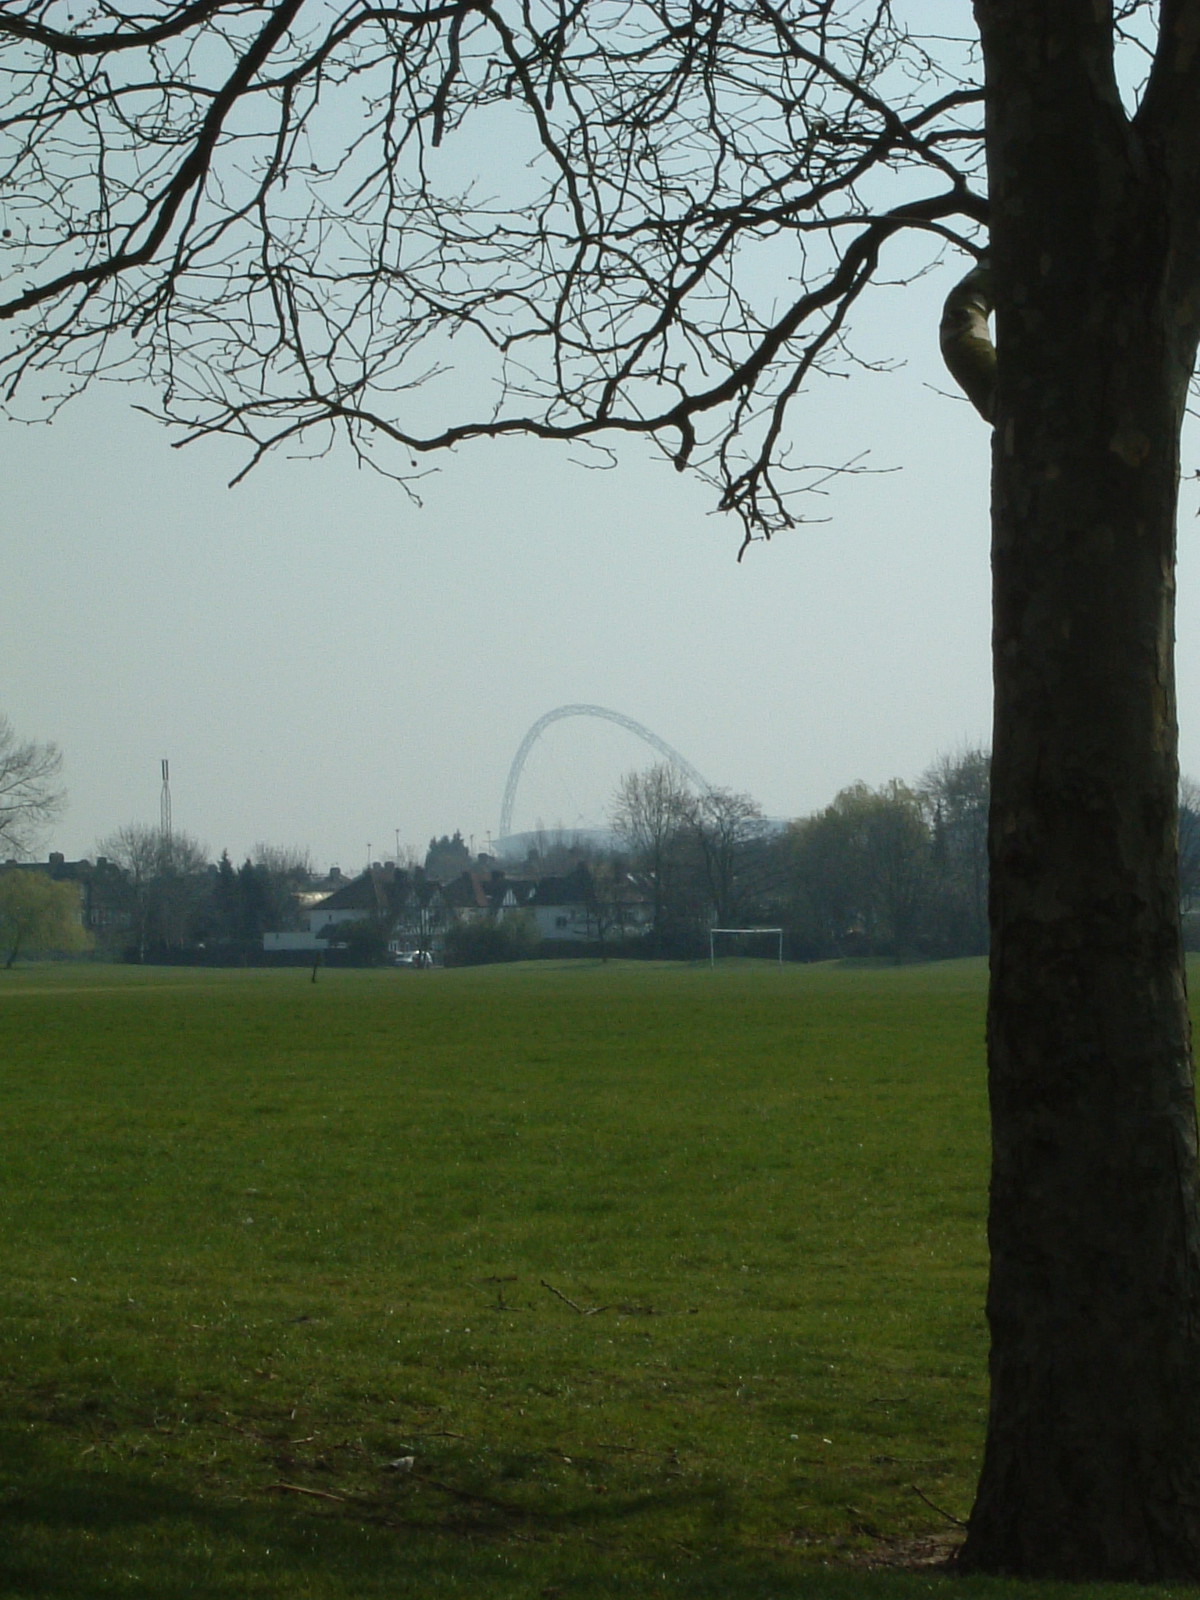 A glimpse of Wembley Stadium from the end of this leg